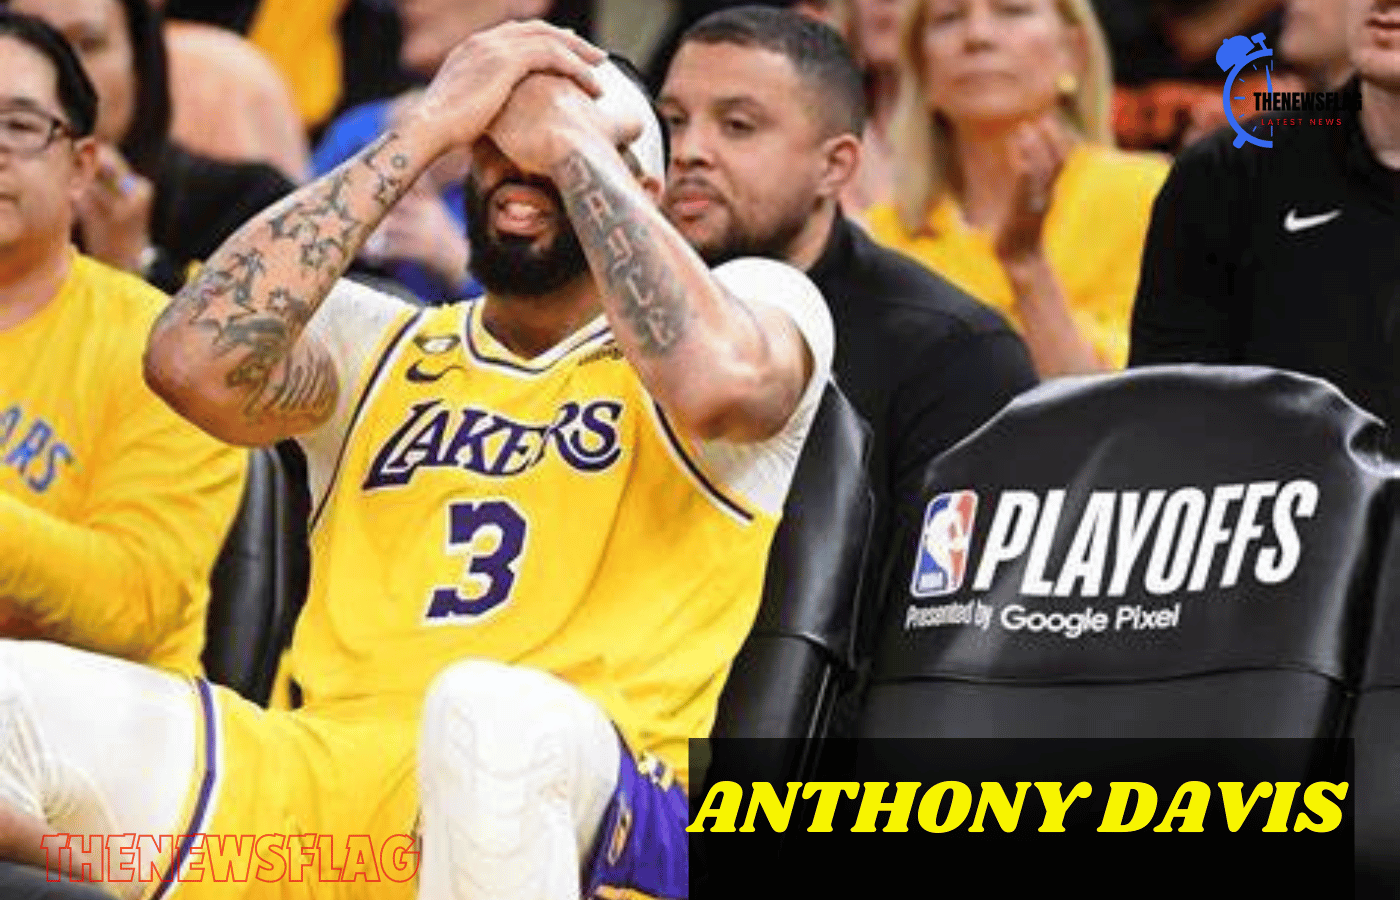 Anthony Davis of the Lakers is injured in the first quarter of the game against the Warriors.